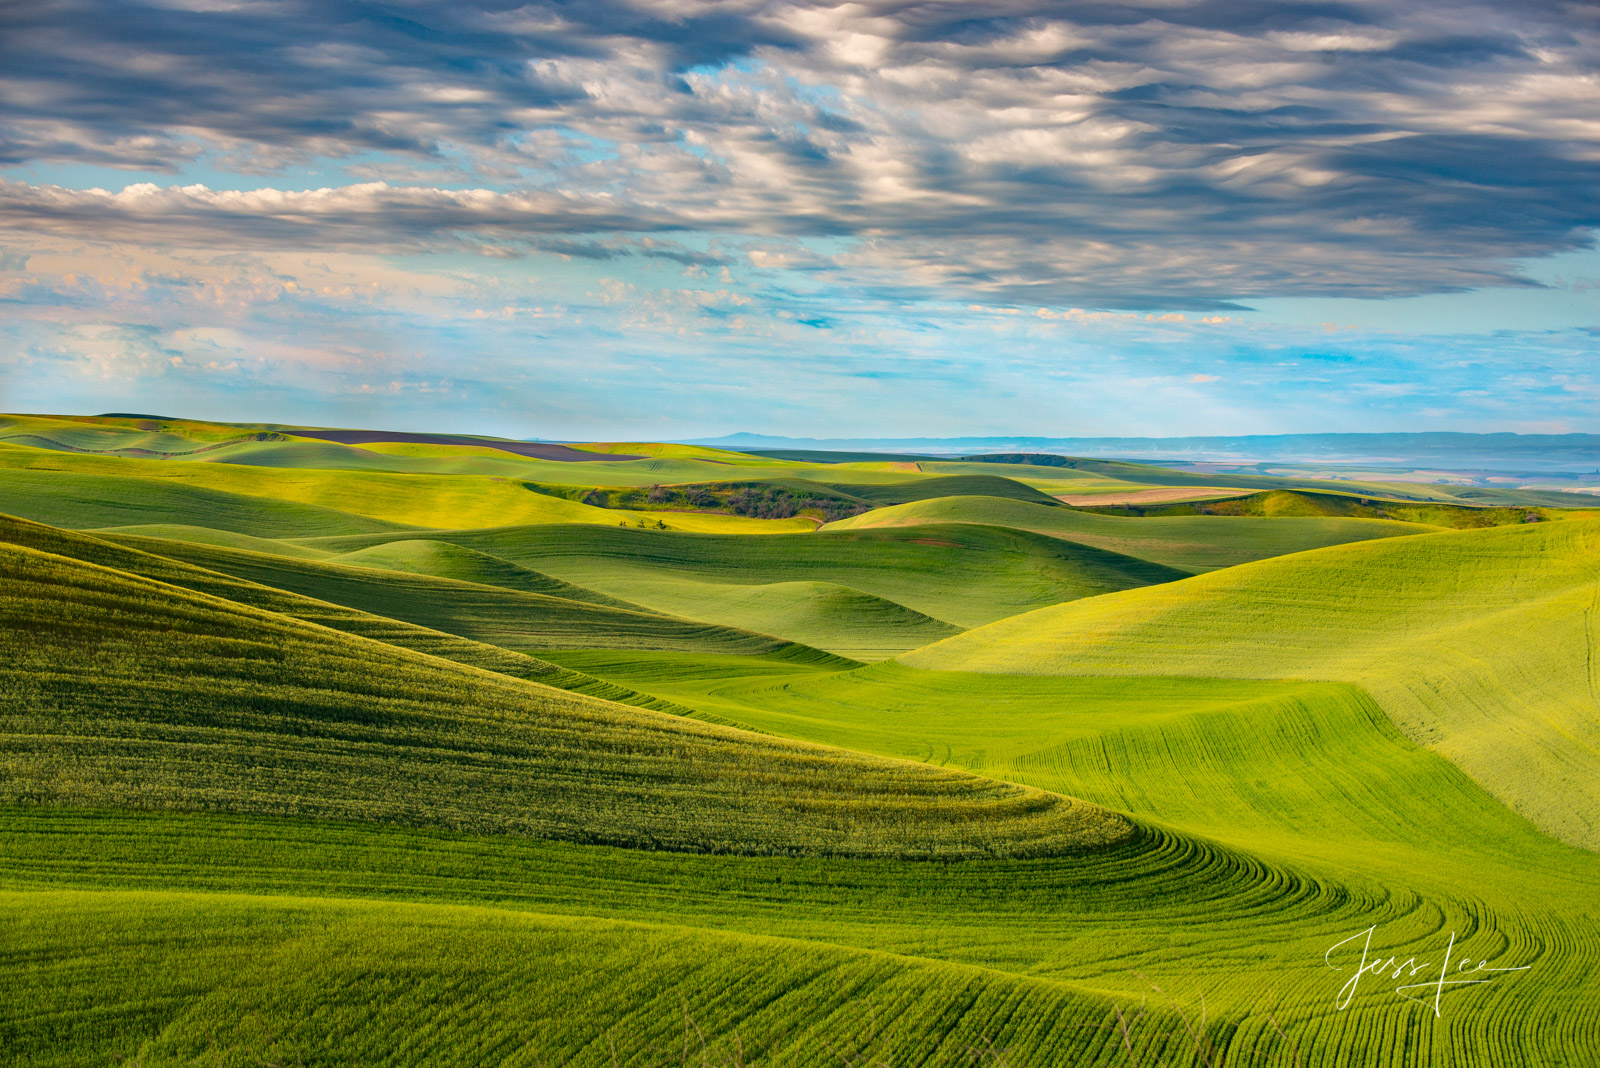 Fine Art Limited Edition of 200 Exclusive high-resolution Museum Quality Prints.  The origin of the name "Palouse" is unclear...